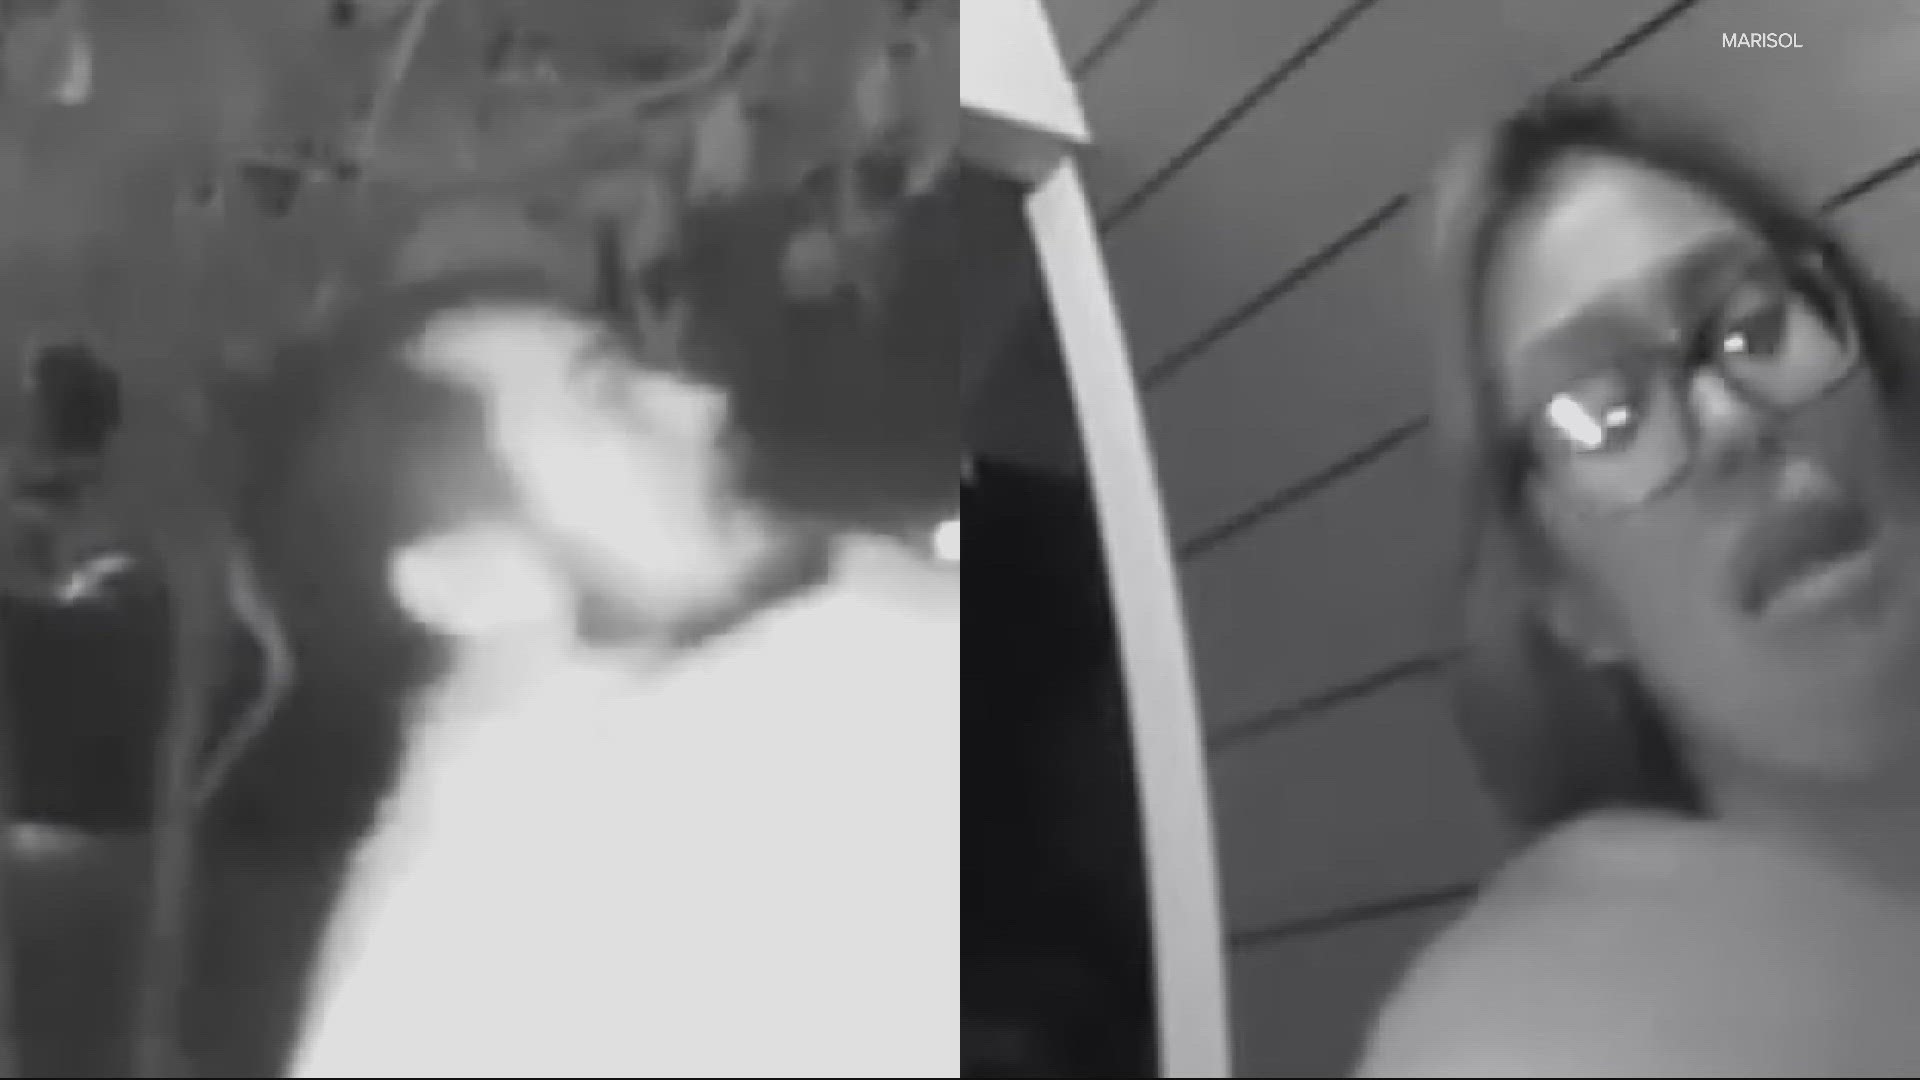 A doorbell camera caught a woman crying for help and then a man grabbing her and driving off. Police are asking for the public's help identifying those involved.